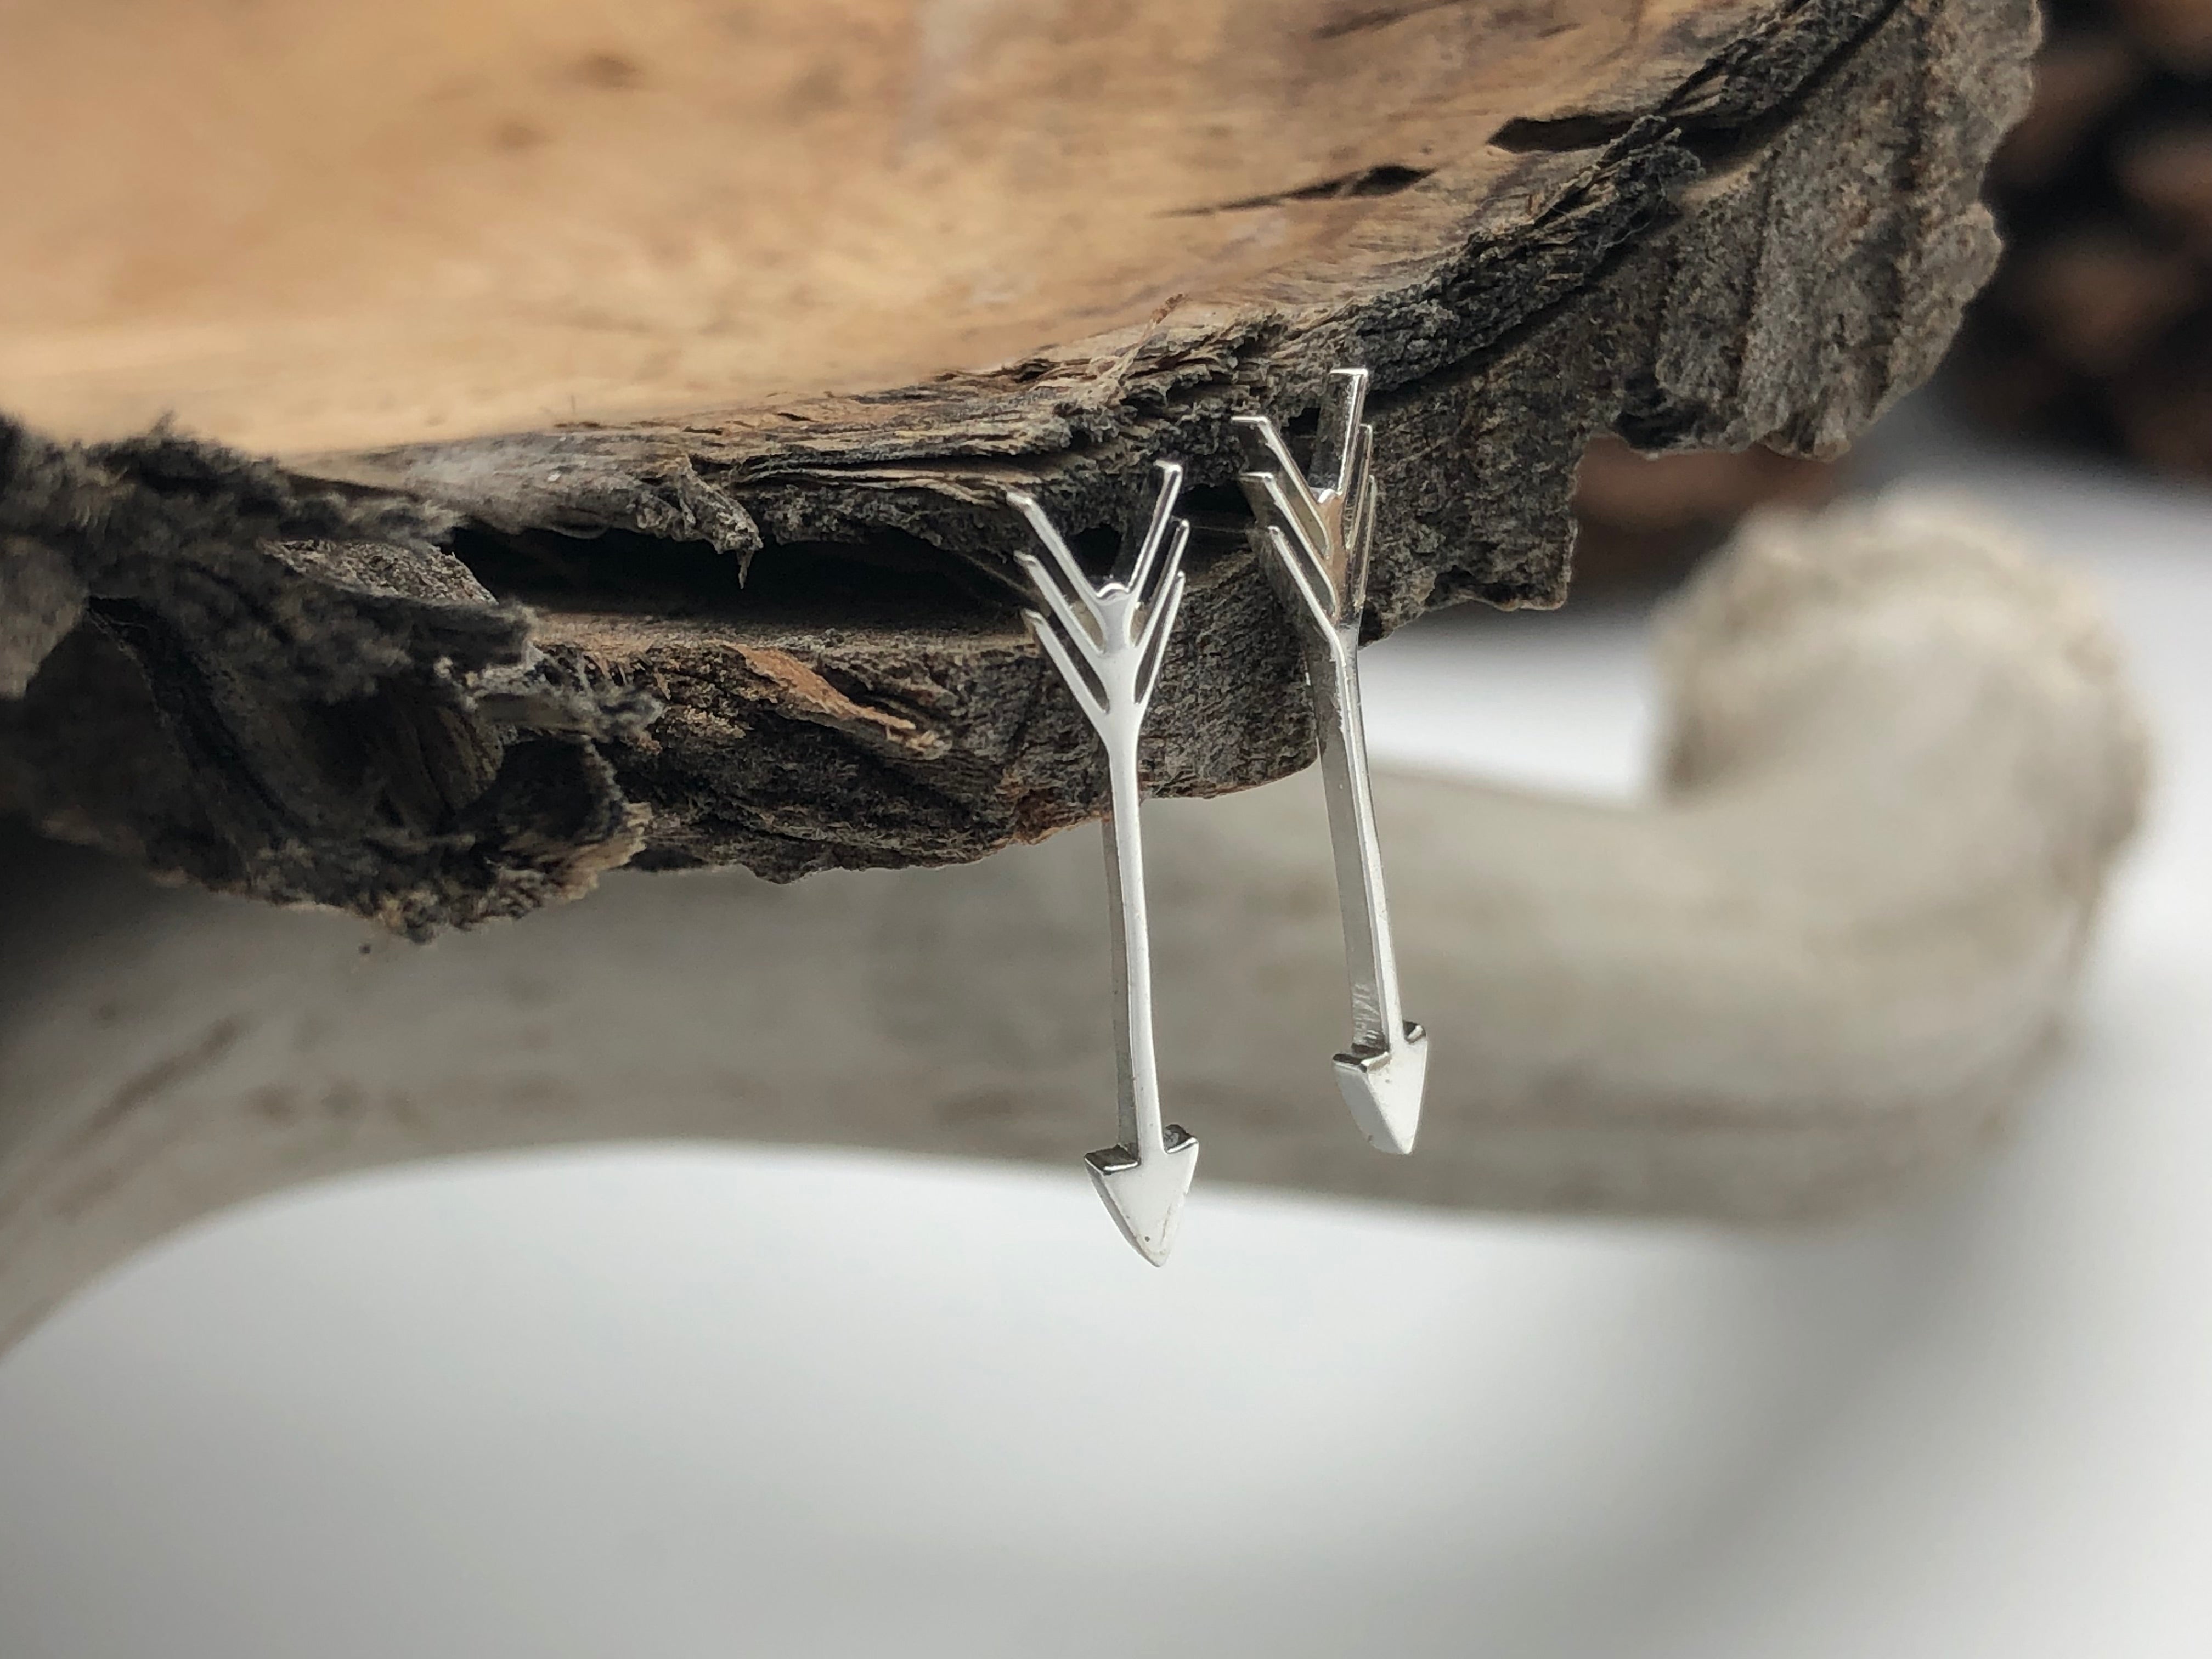 Petite arrow studs made from stainless steel in rose gold and silver